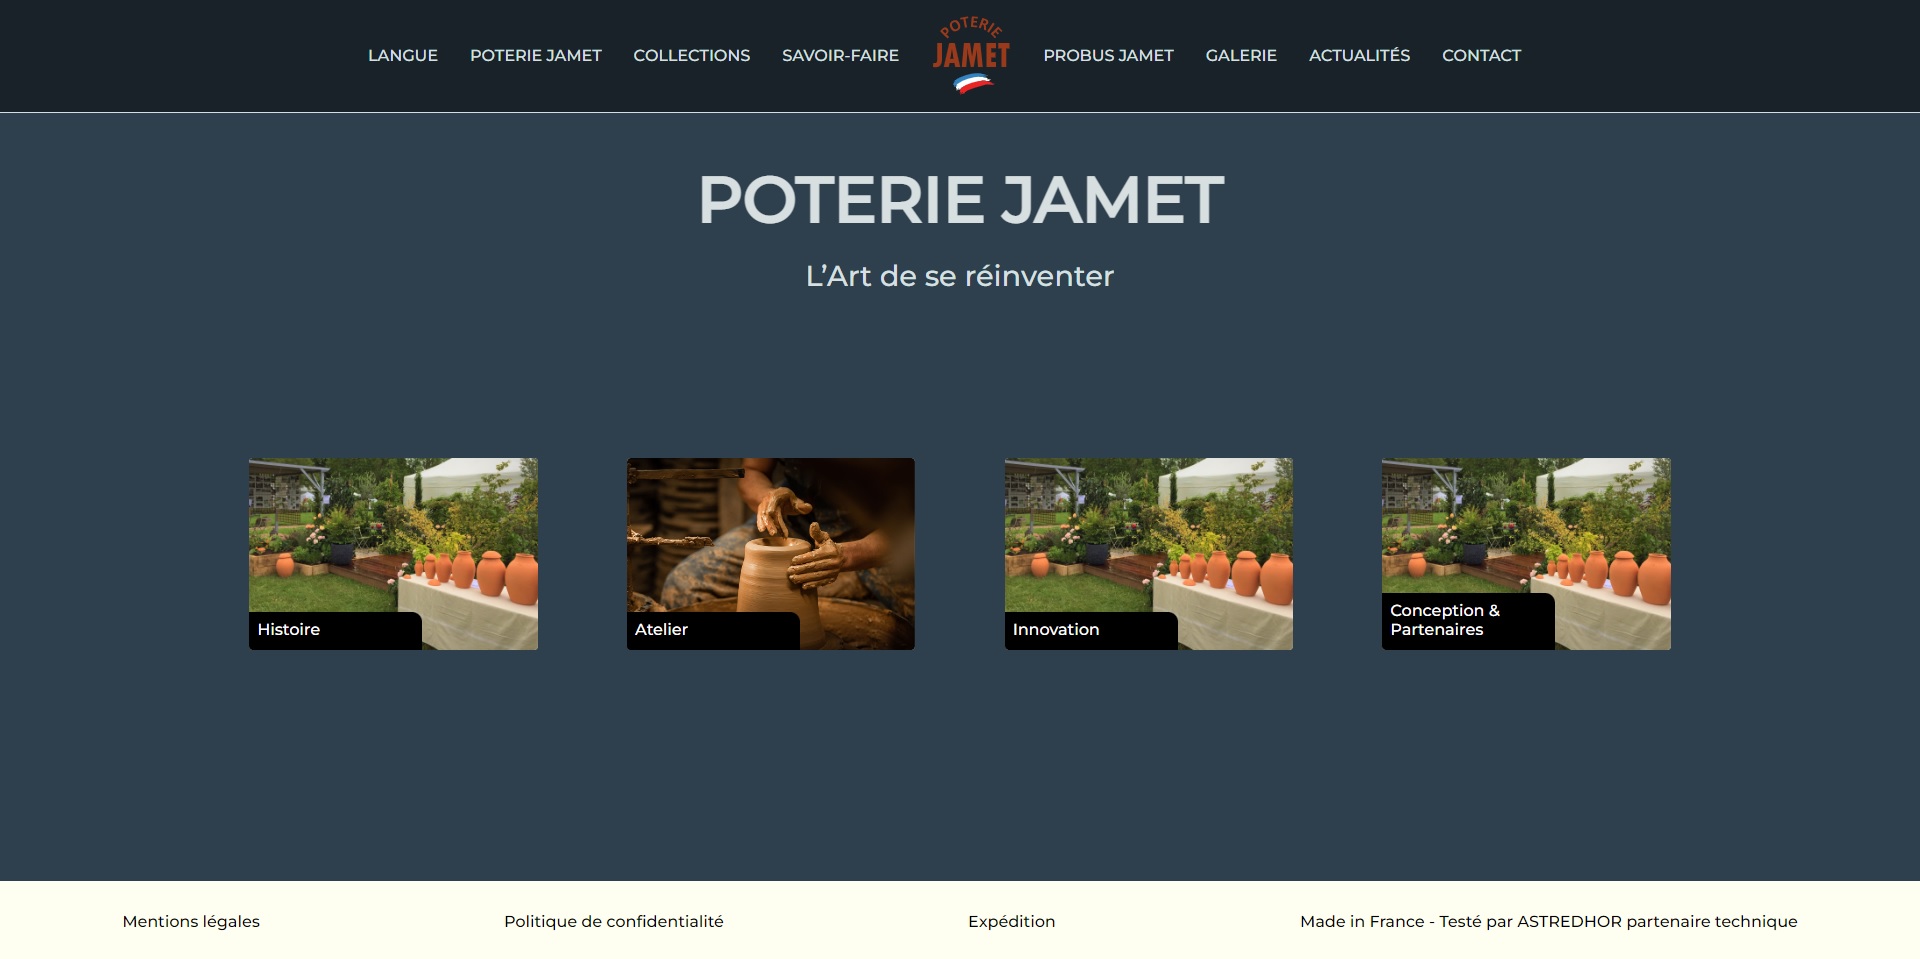 First page of poterie jamet website